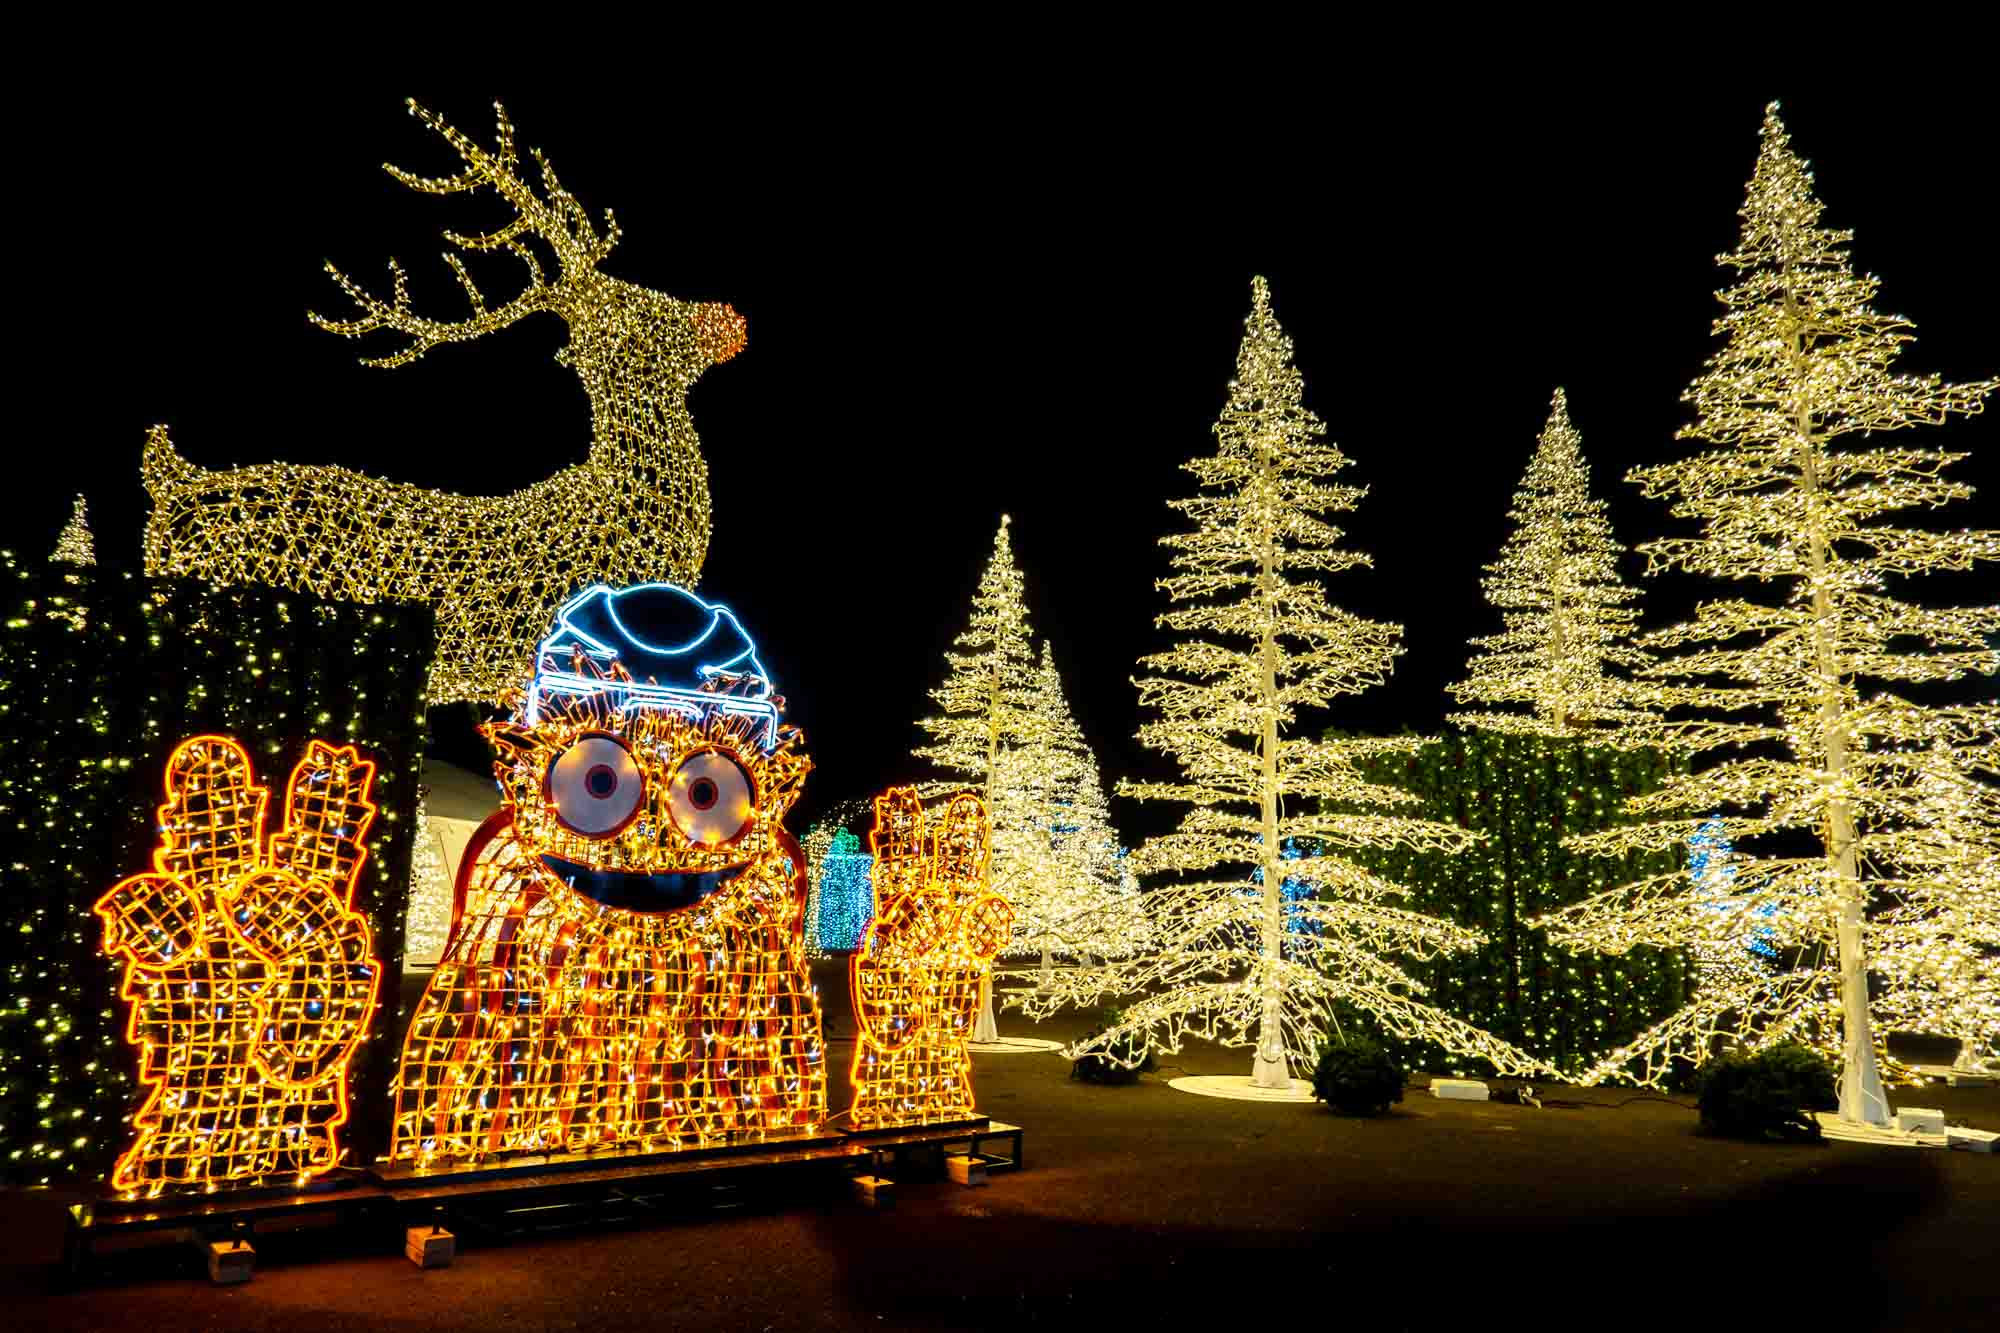 Illuminated Gritty mascot, plus Christmas trees and reindeer